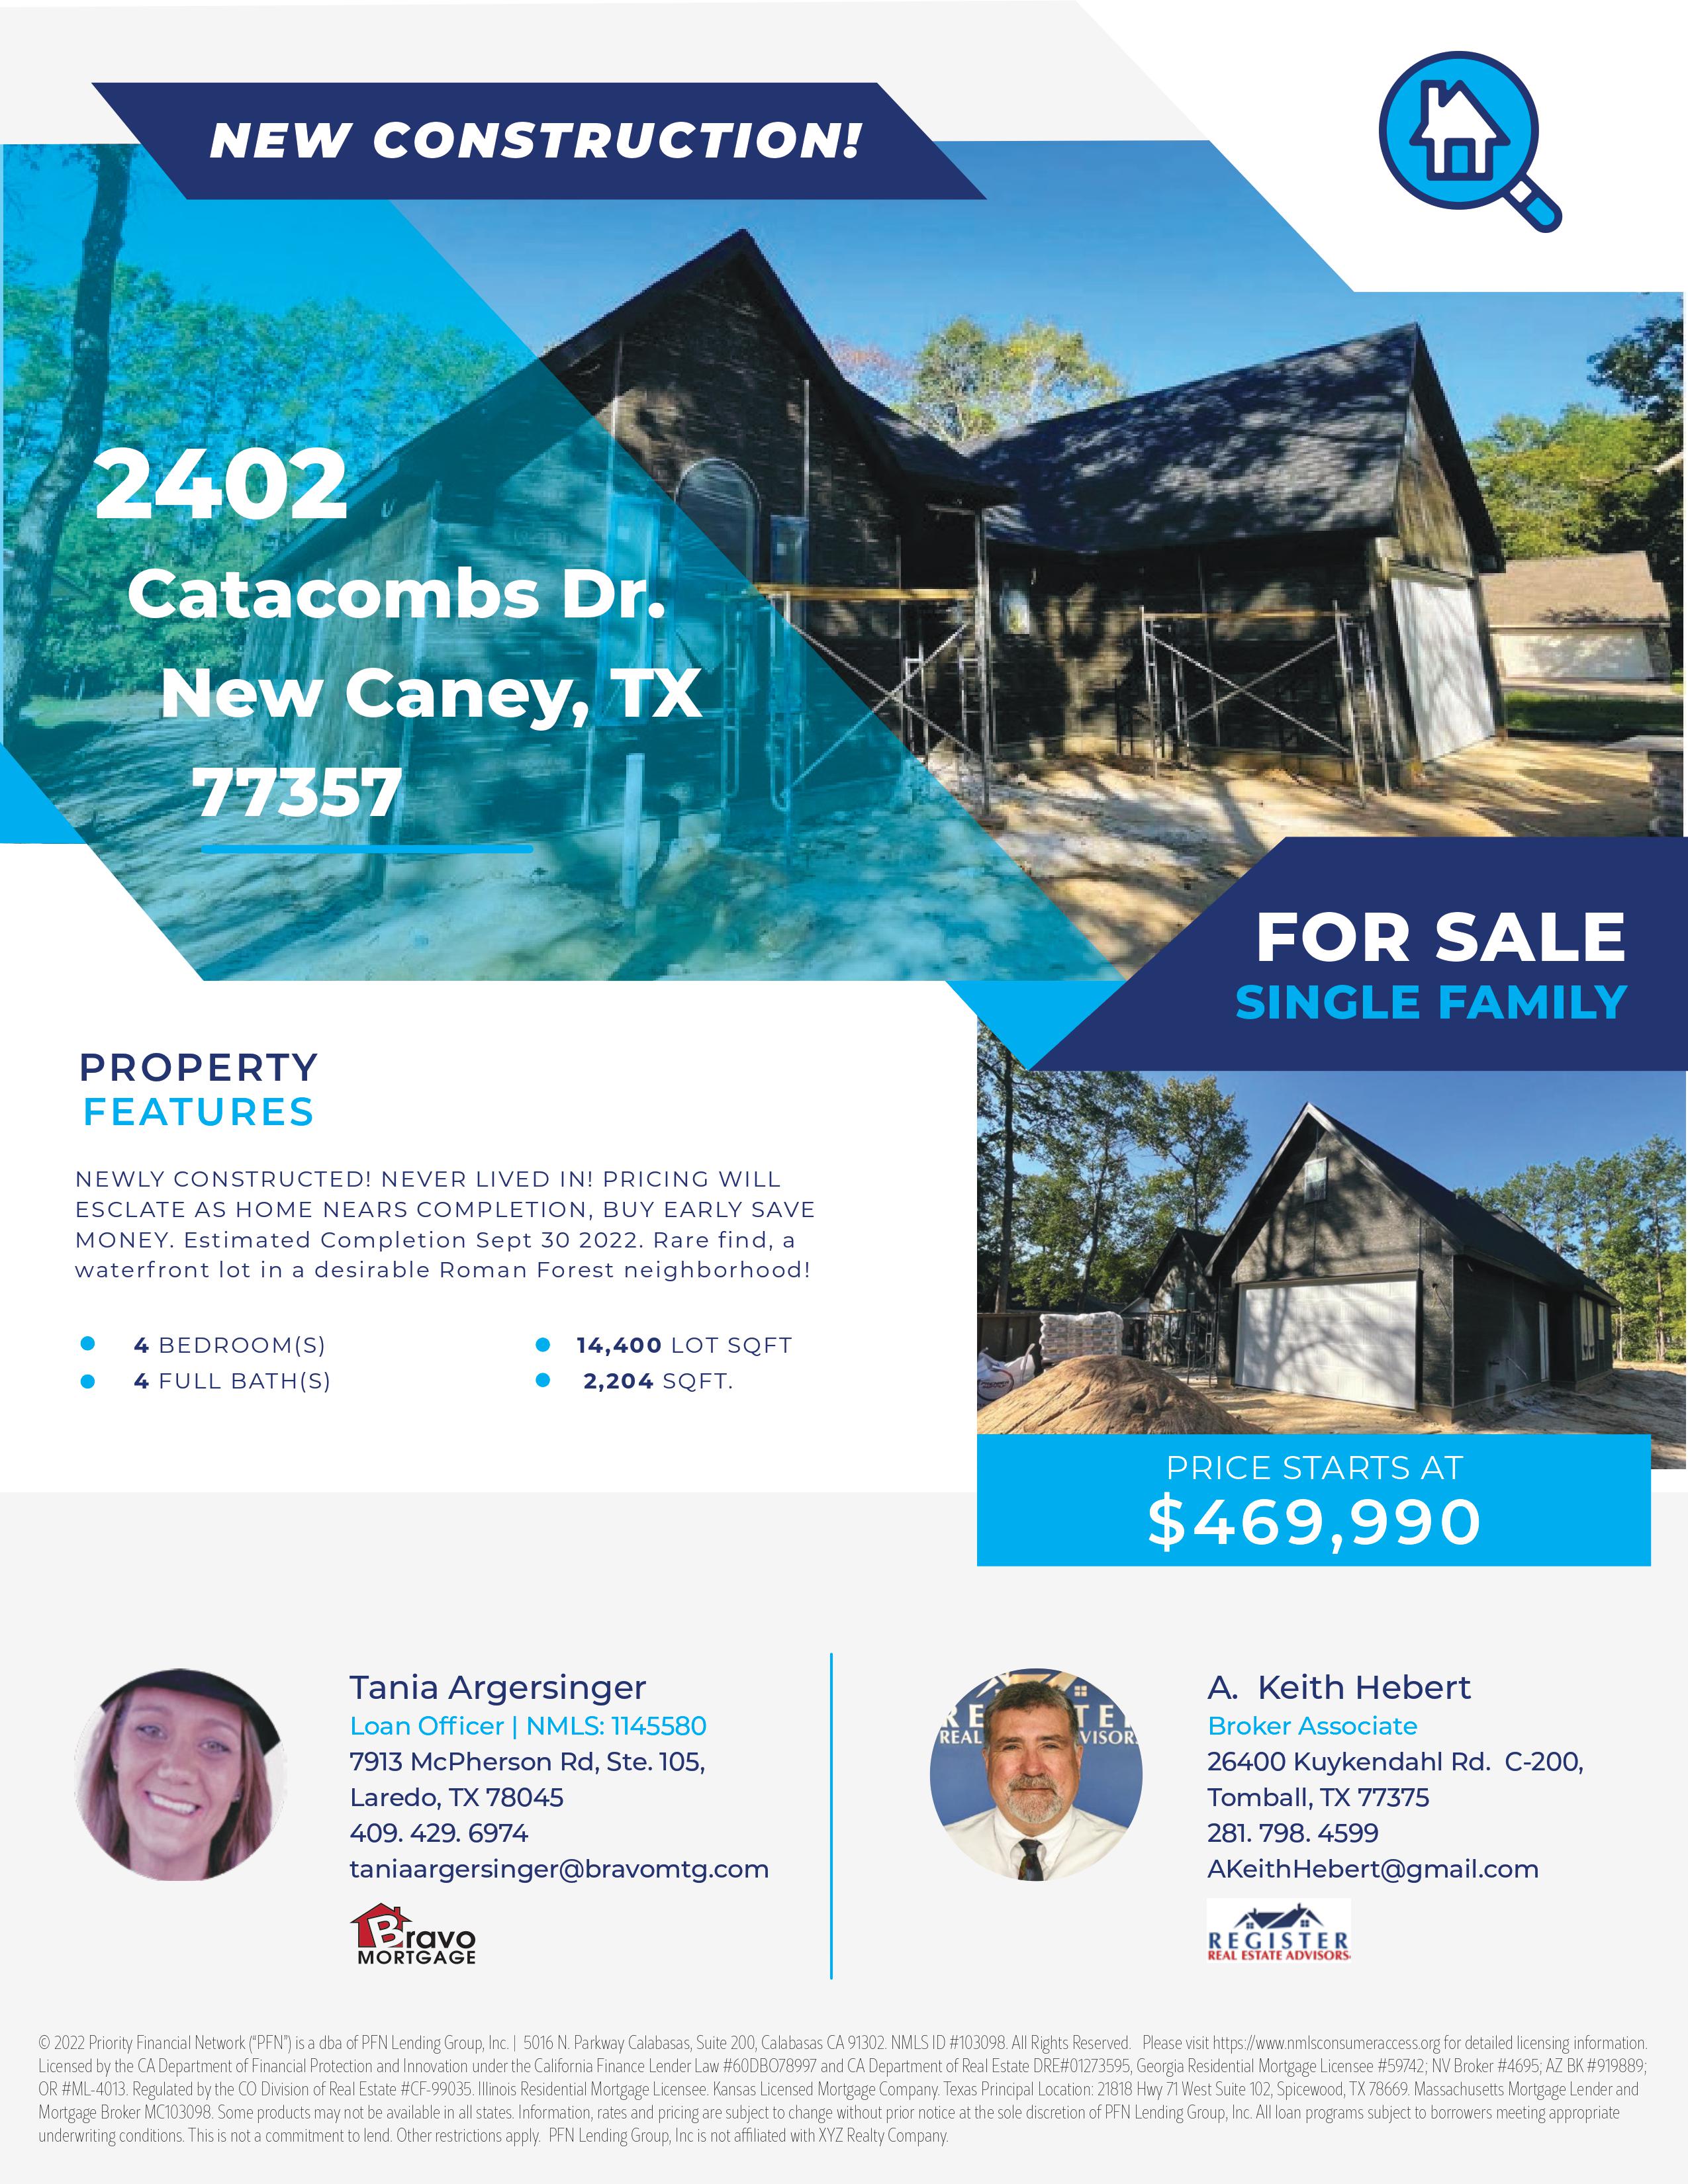 For Sale | New Construction | New Caney | Roman Forest | 2402 Catacombs Drive